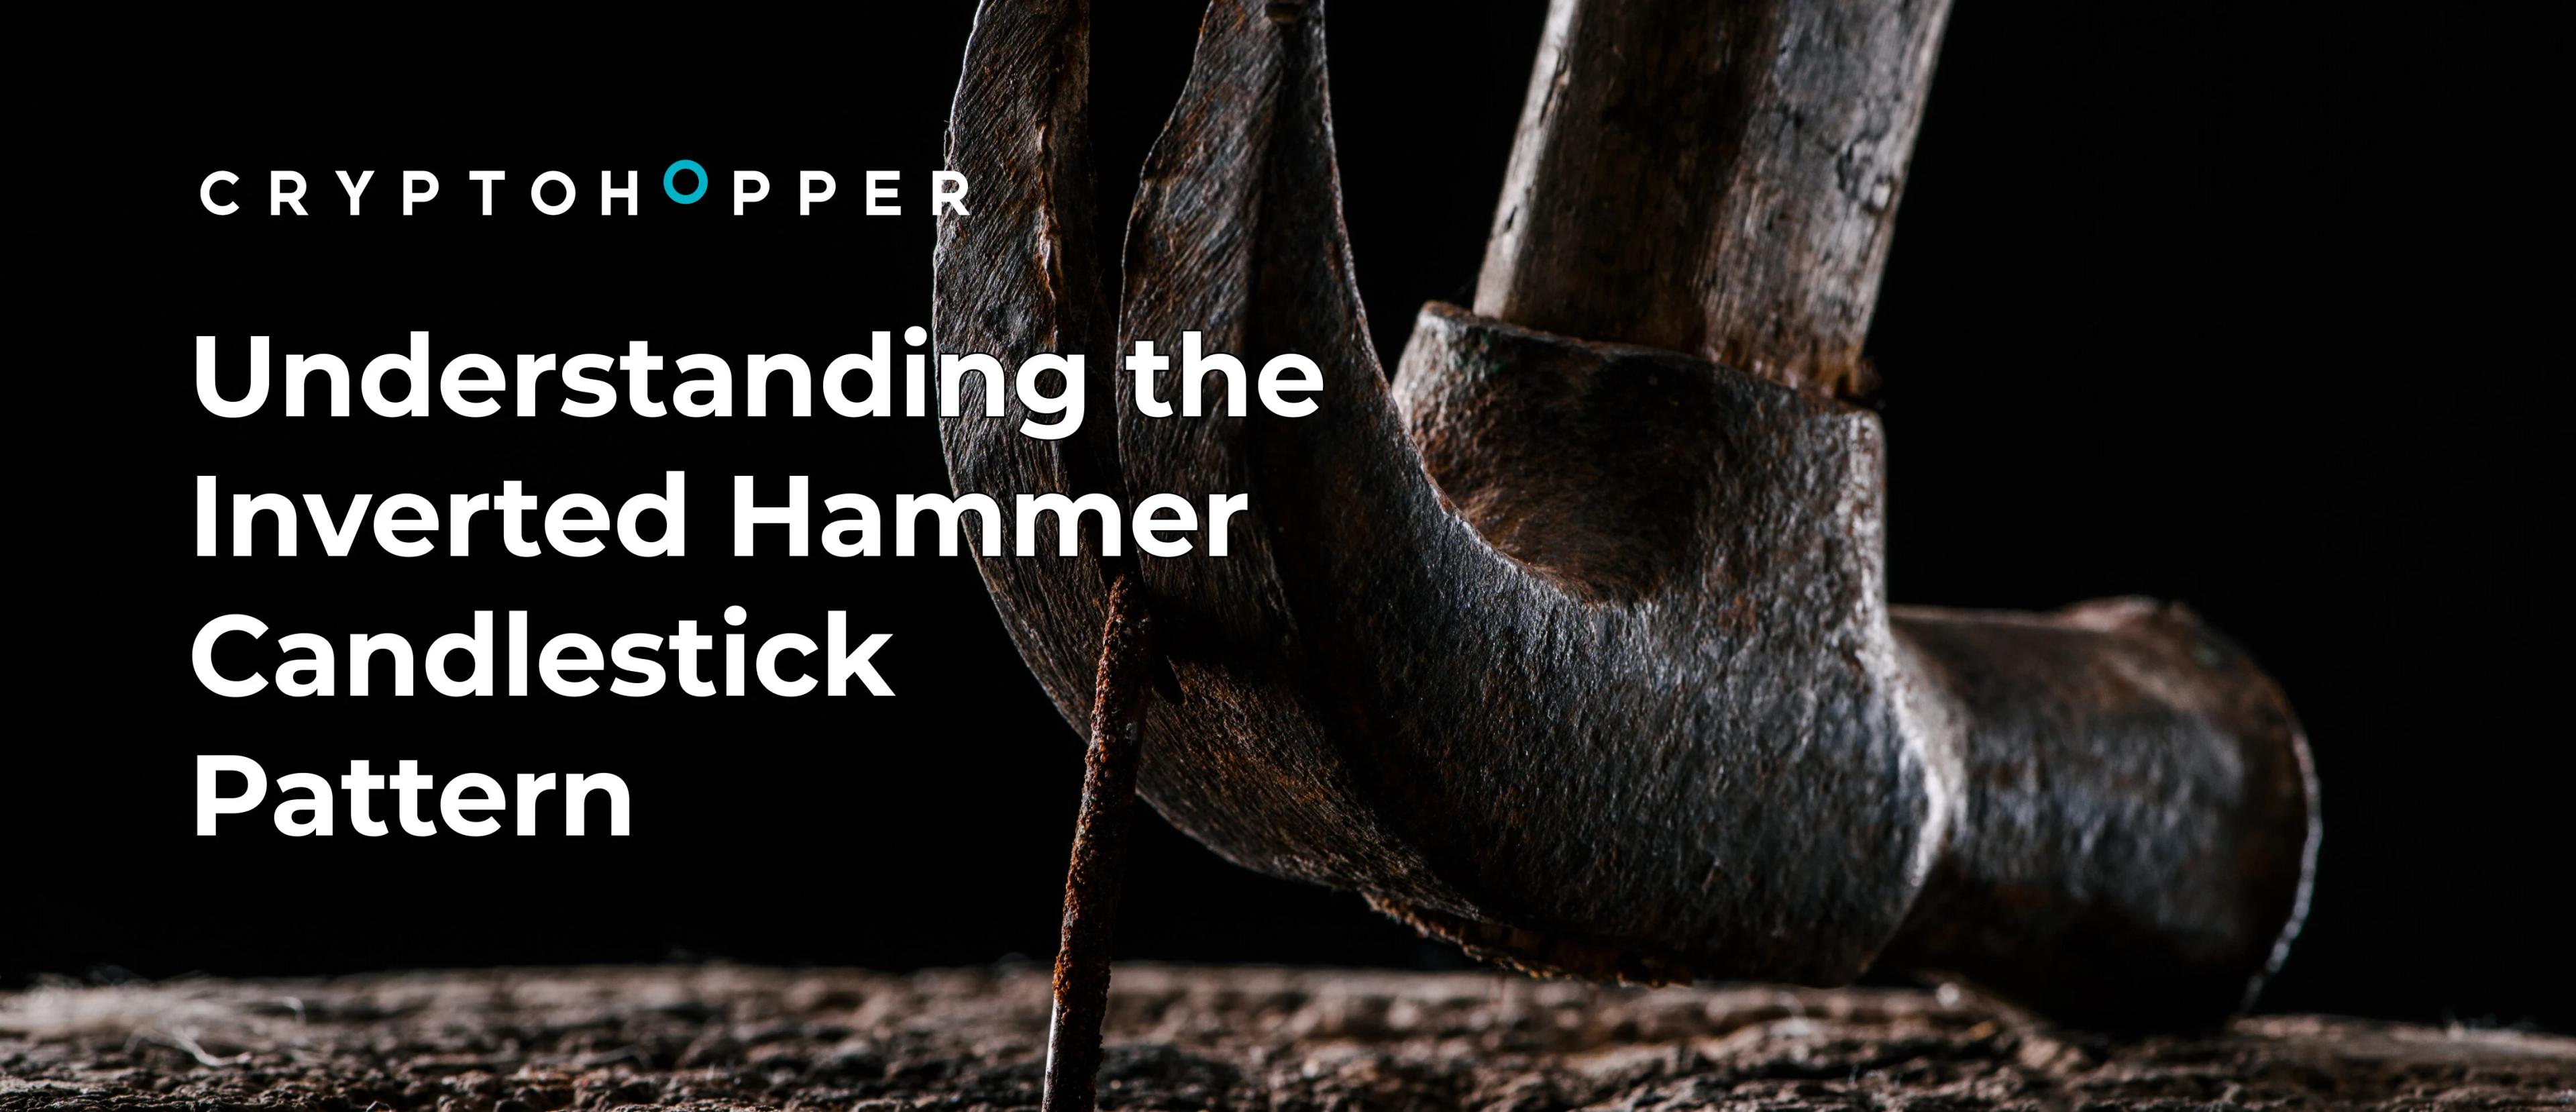 Understanding the Inverted Hammer Candlestick Pattern in Technical Analysis